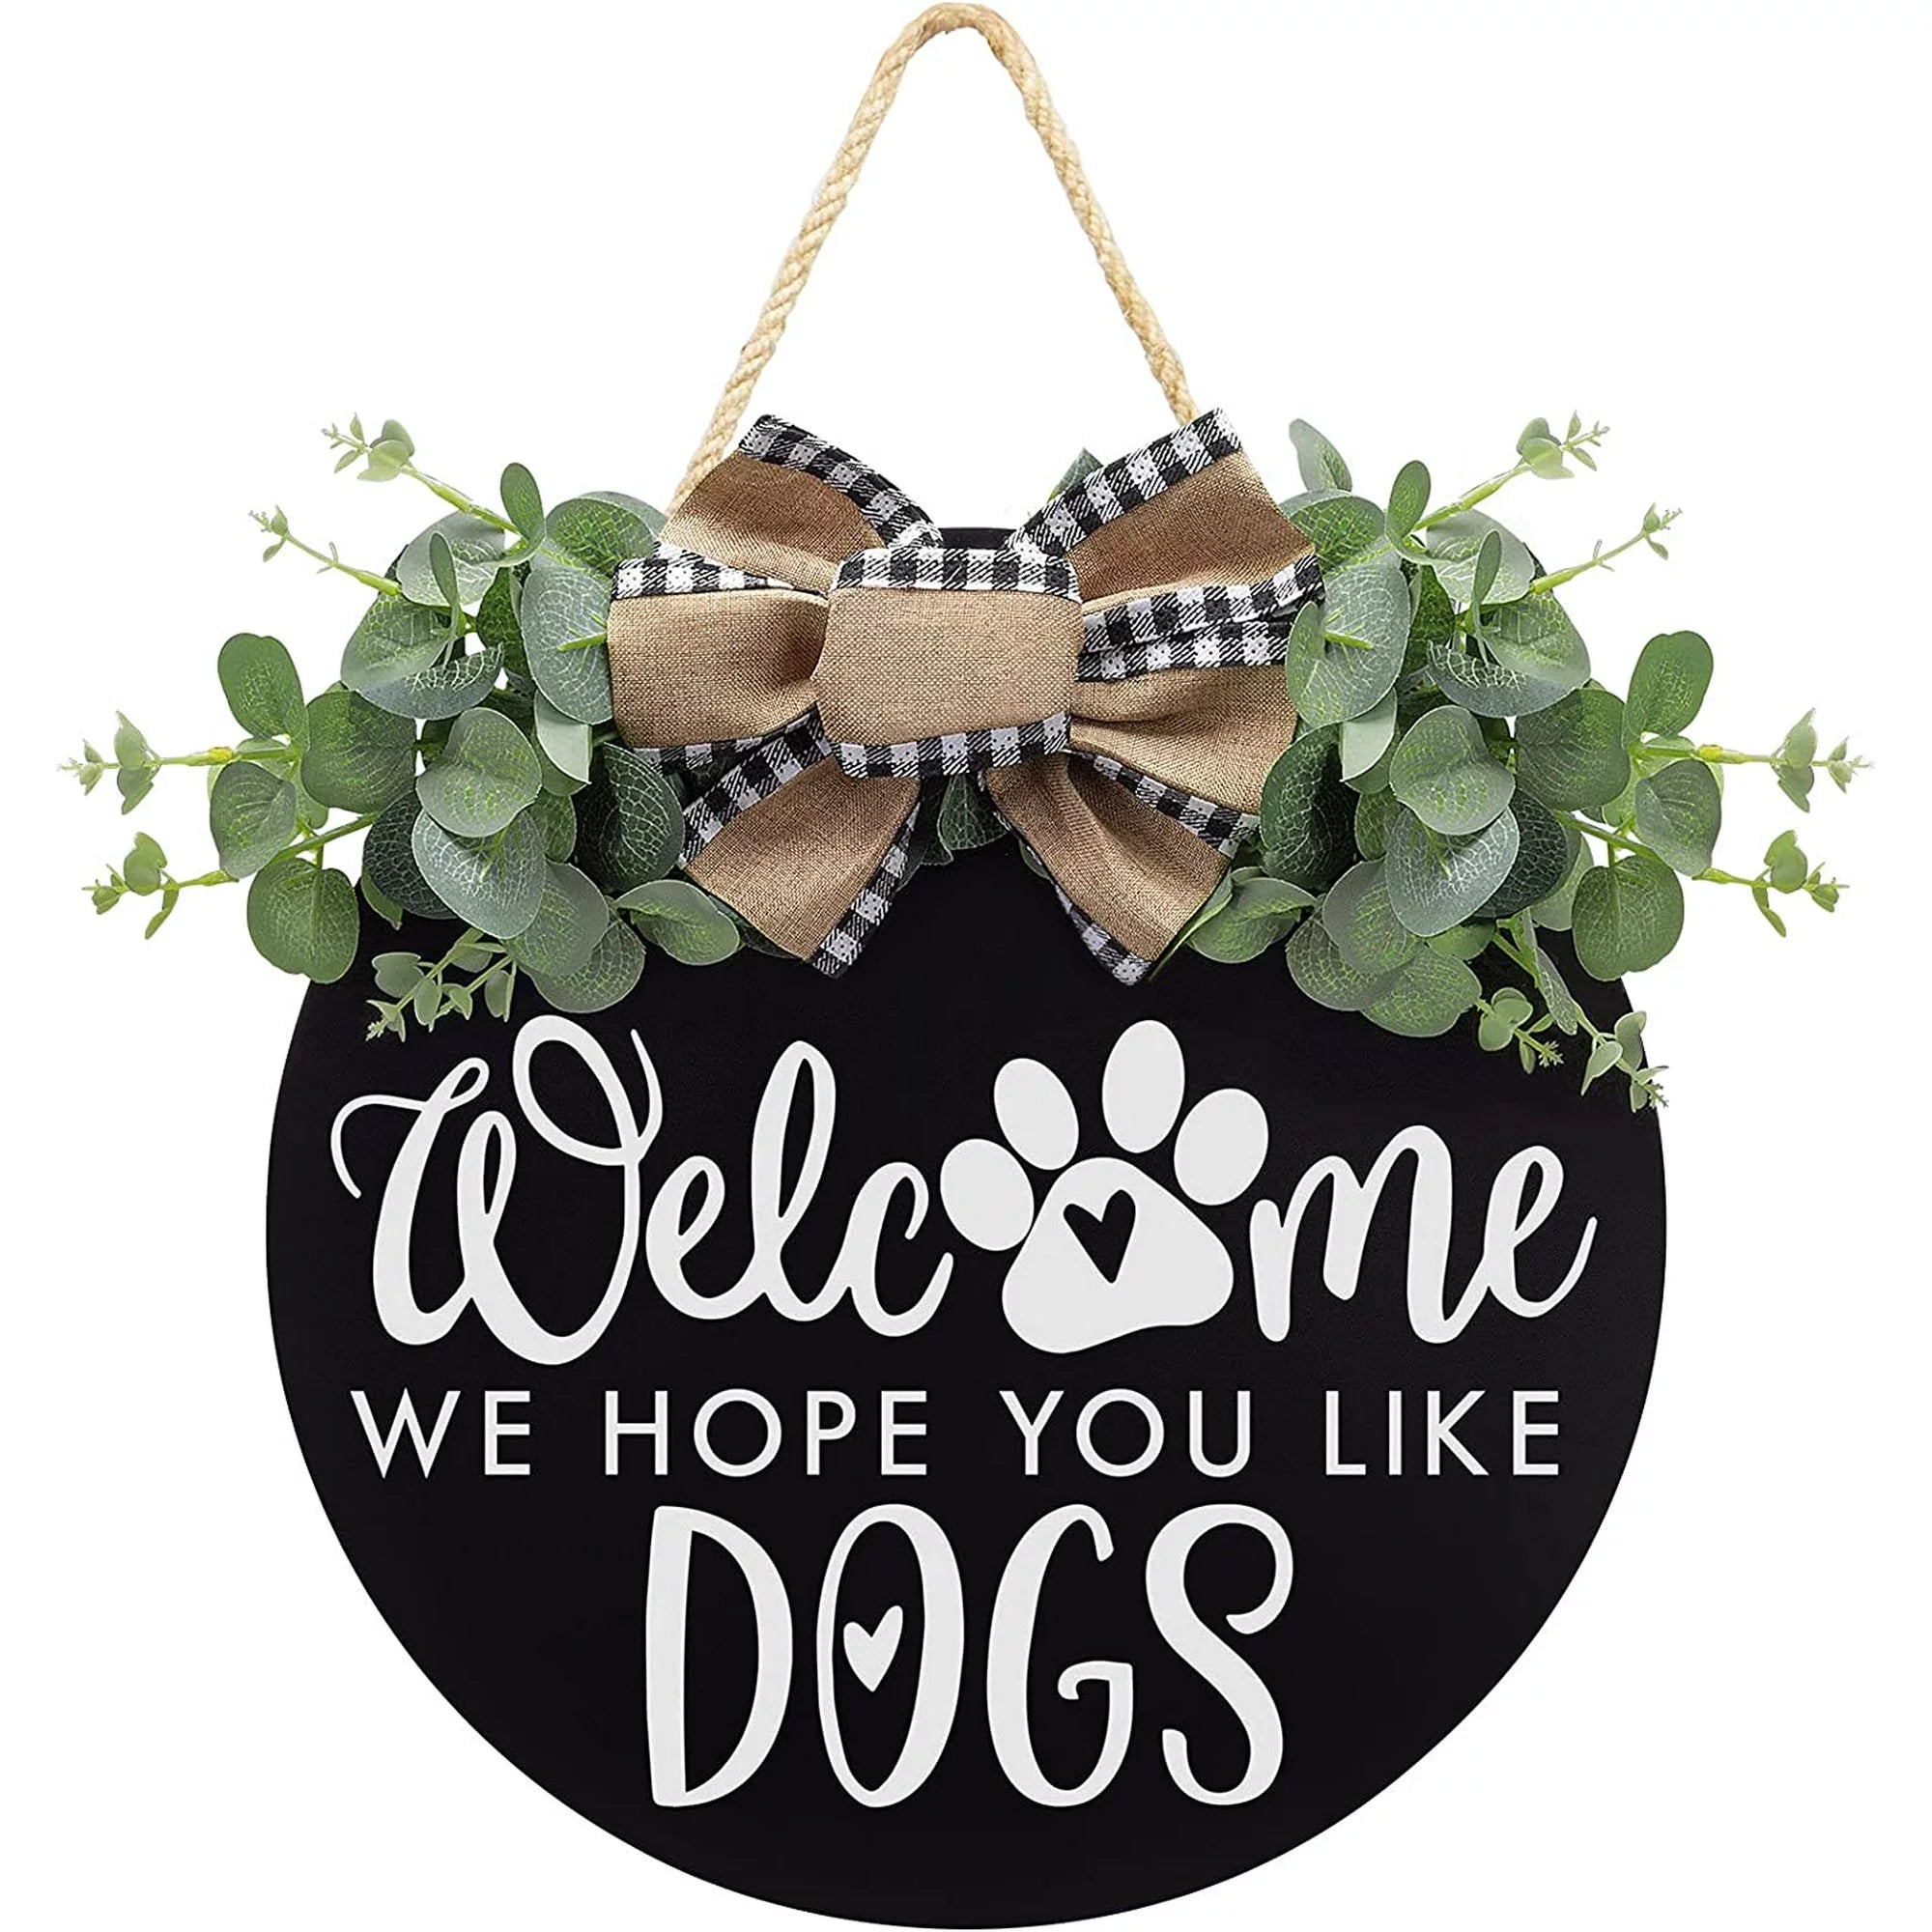 "We hope you like Dogs" Sign